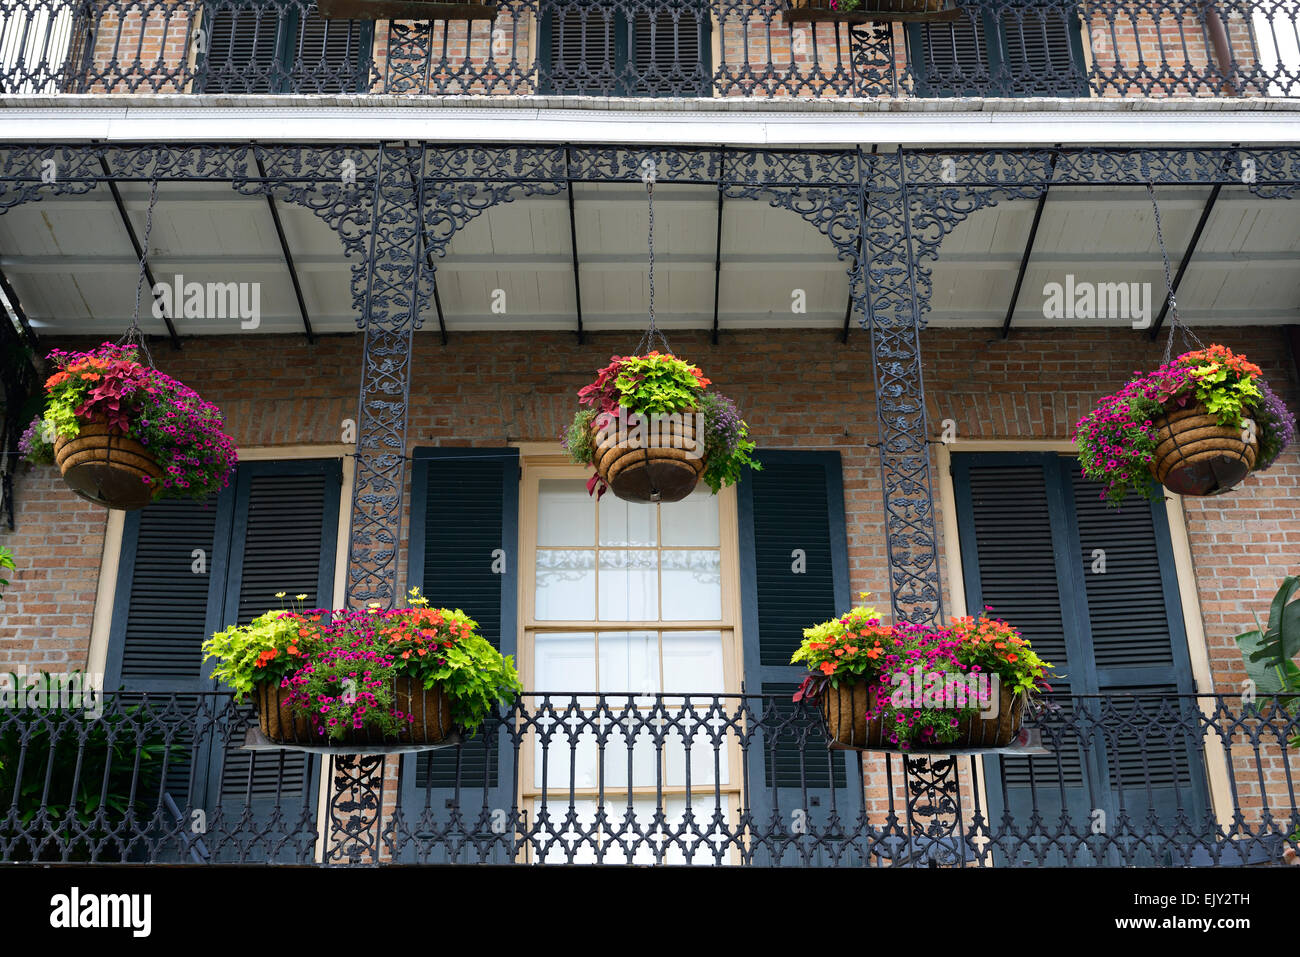 https://c8.alamy.com/comp/EJY2TH/hanging-baskets-planters-balcony-balconies-decorate-french-quarter-EJY2TH.jpg